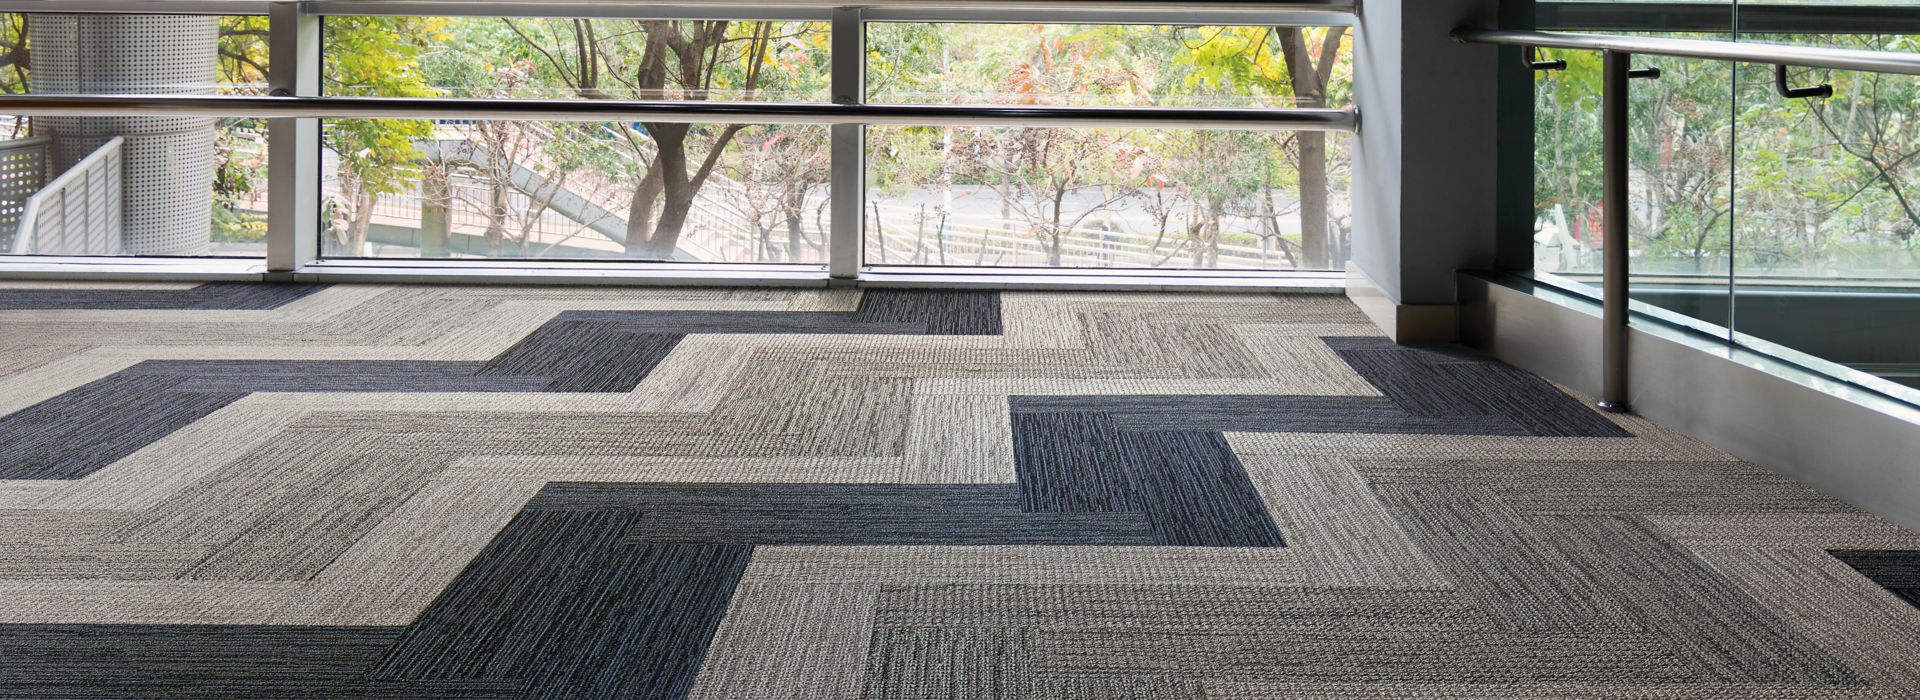 Interface Afternoon Light and Winter Sun carpet tile in open area with glass walls imagen número 1